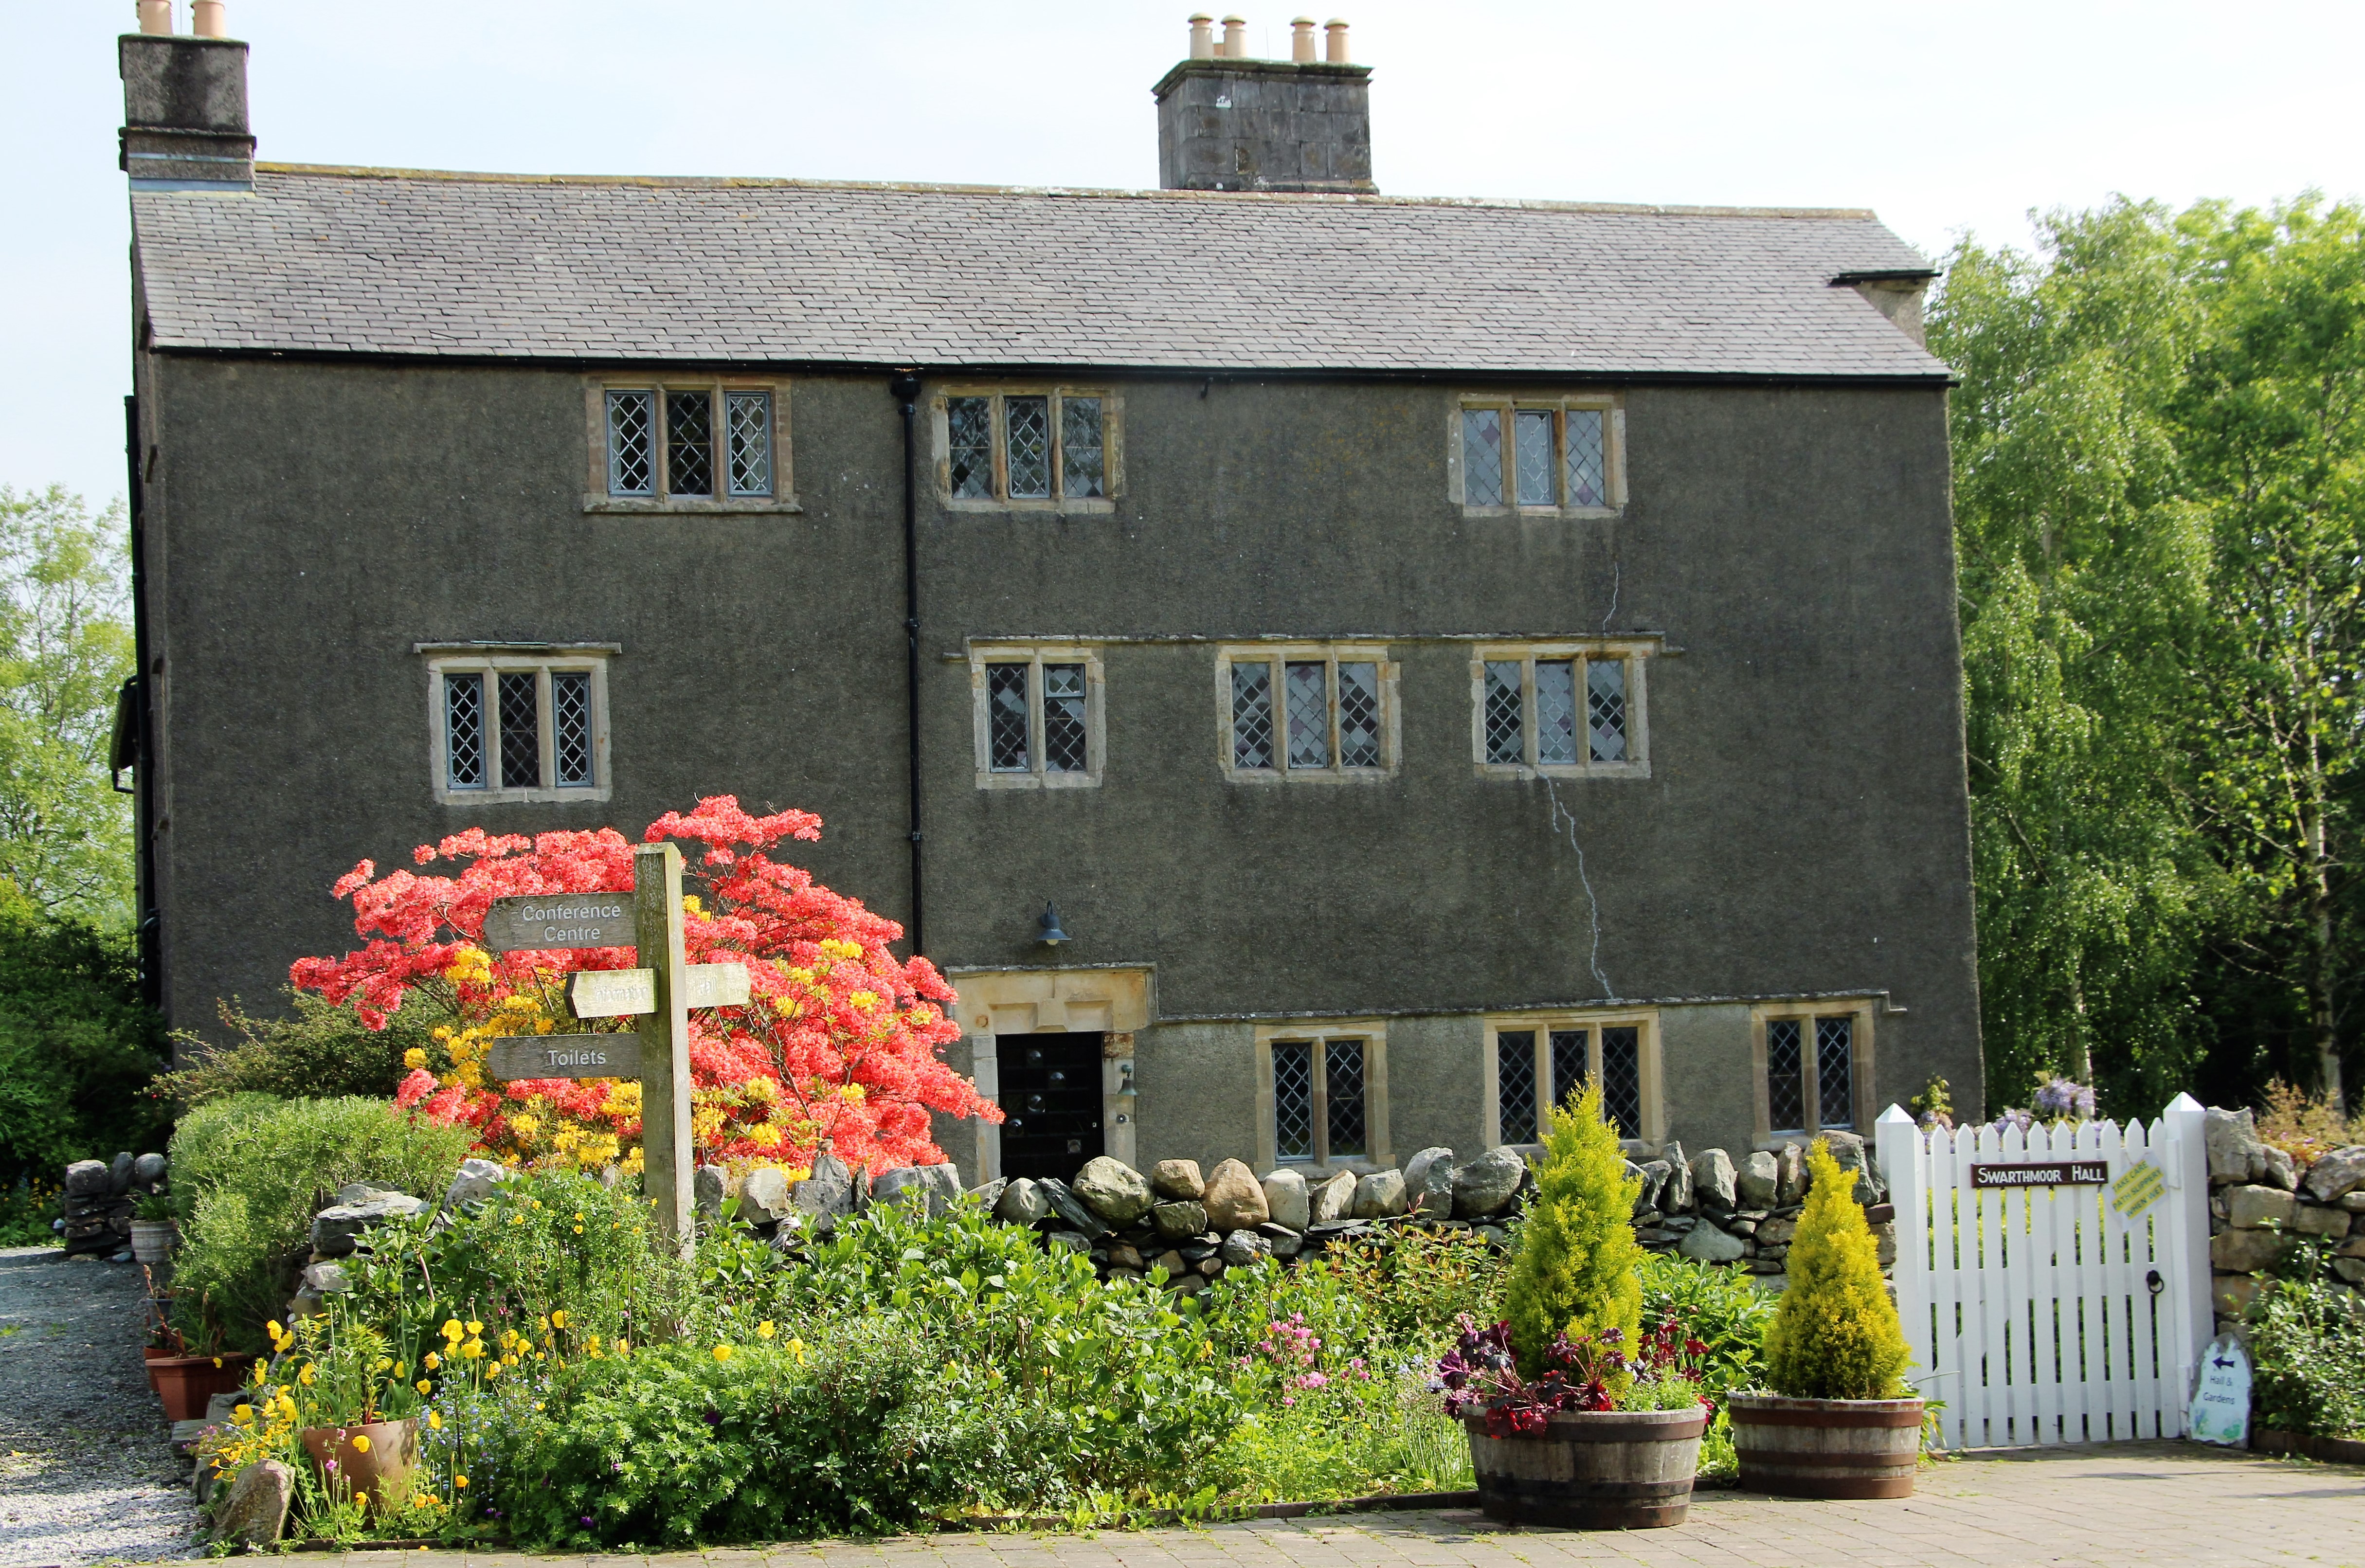 Swarthmoor Hall, where Howgill met with Margaret Fell and George Fox